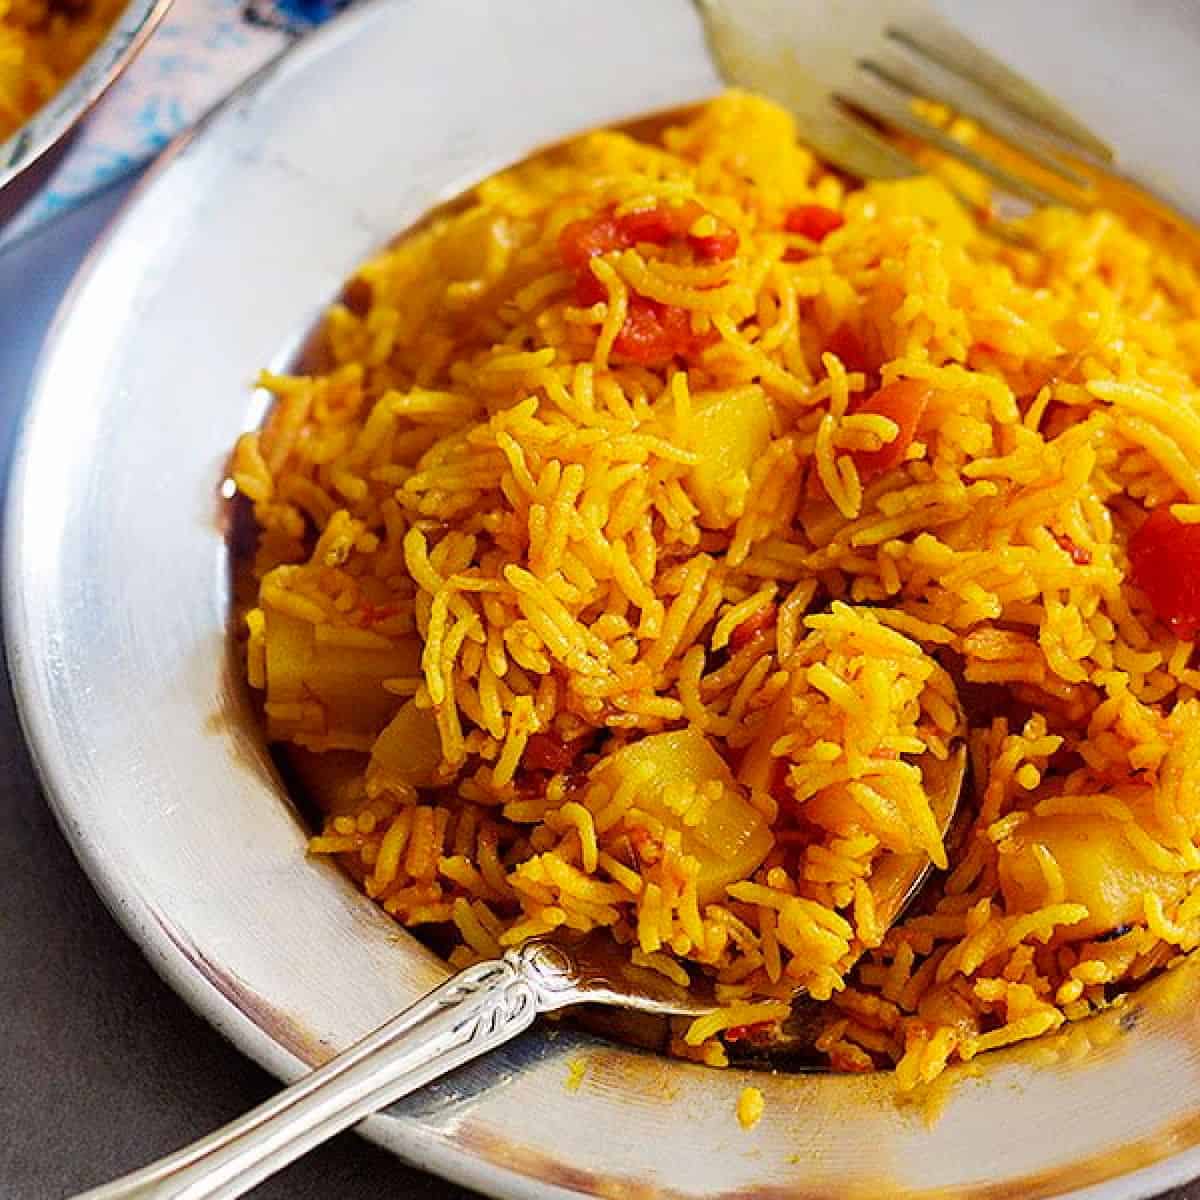 Persian tomato rice is an easy vegetarian dish full of amazing flavors. This one pot rice recipe uses very few ingredients and can be prepared in no time!
